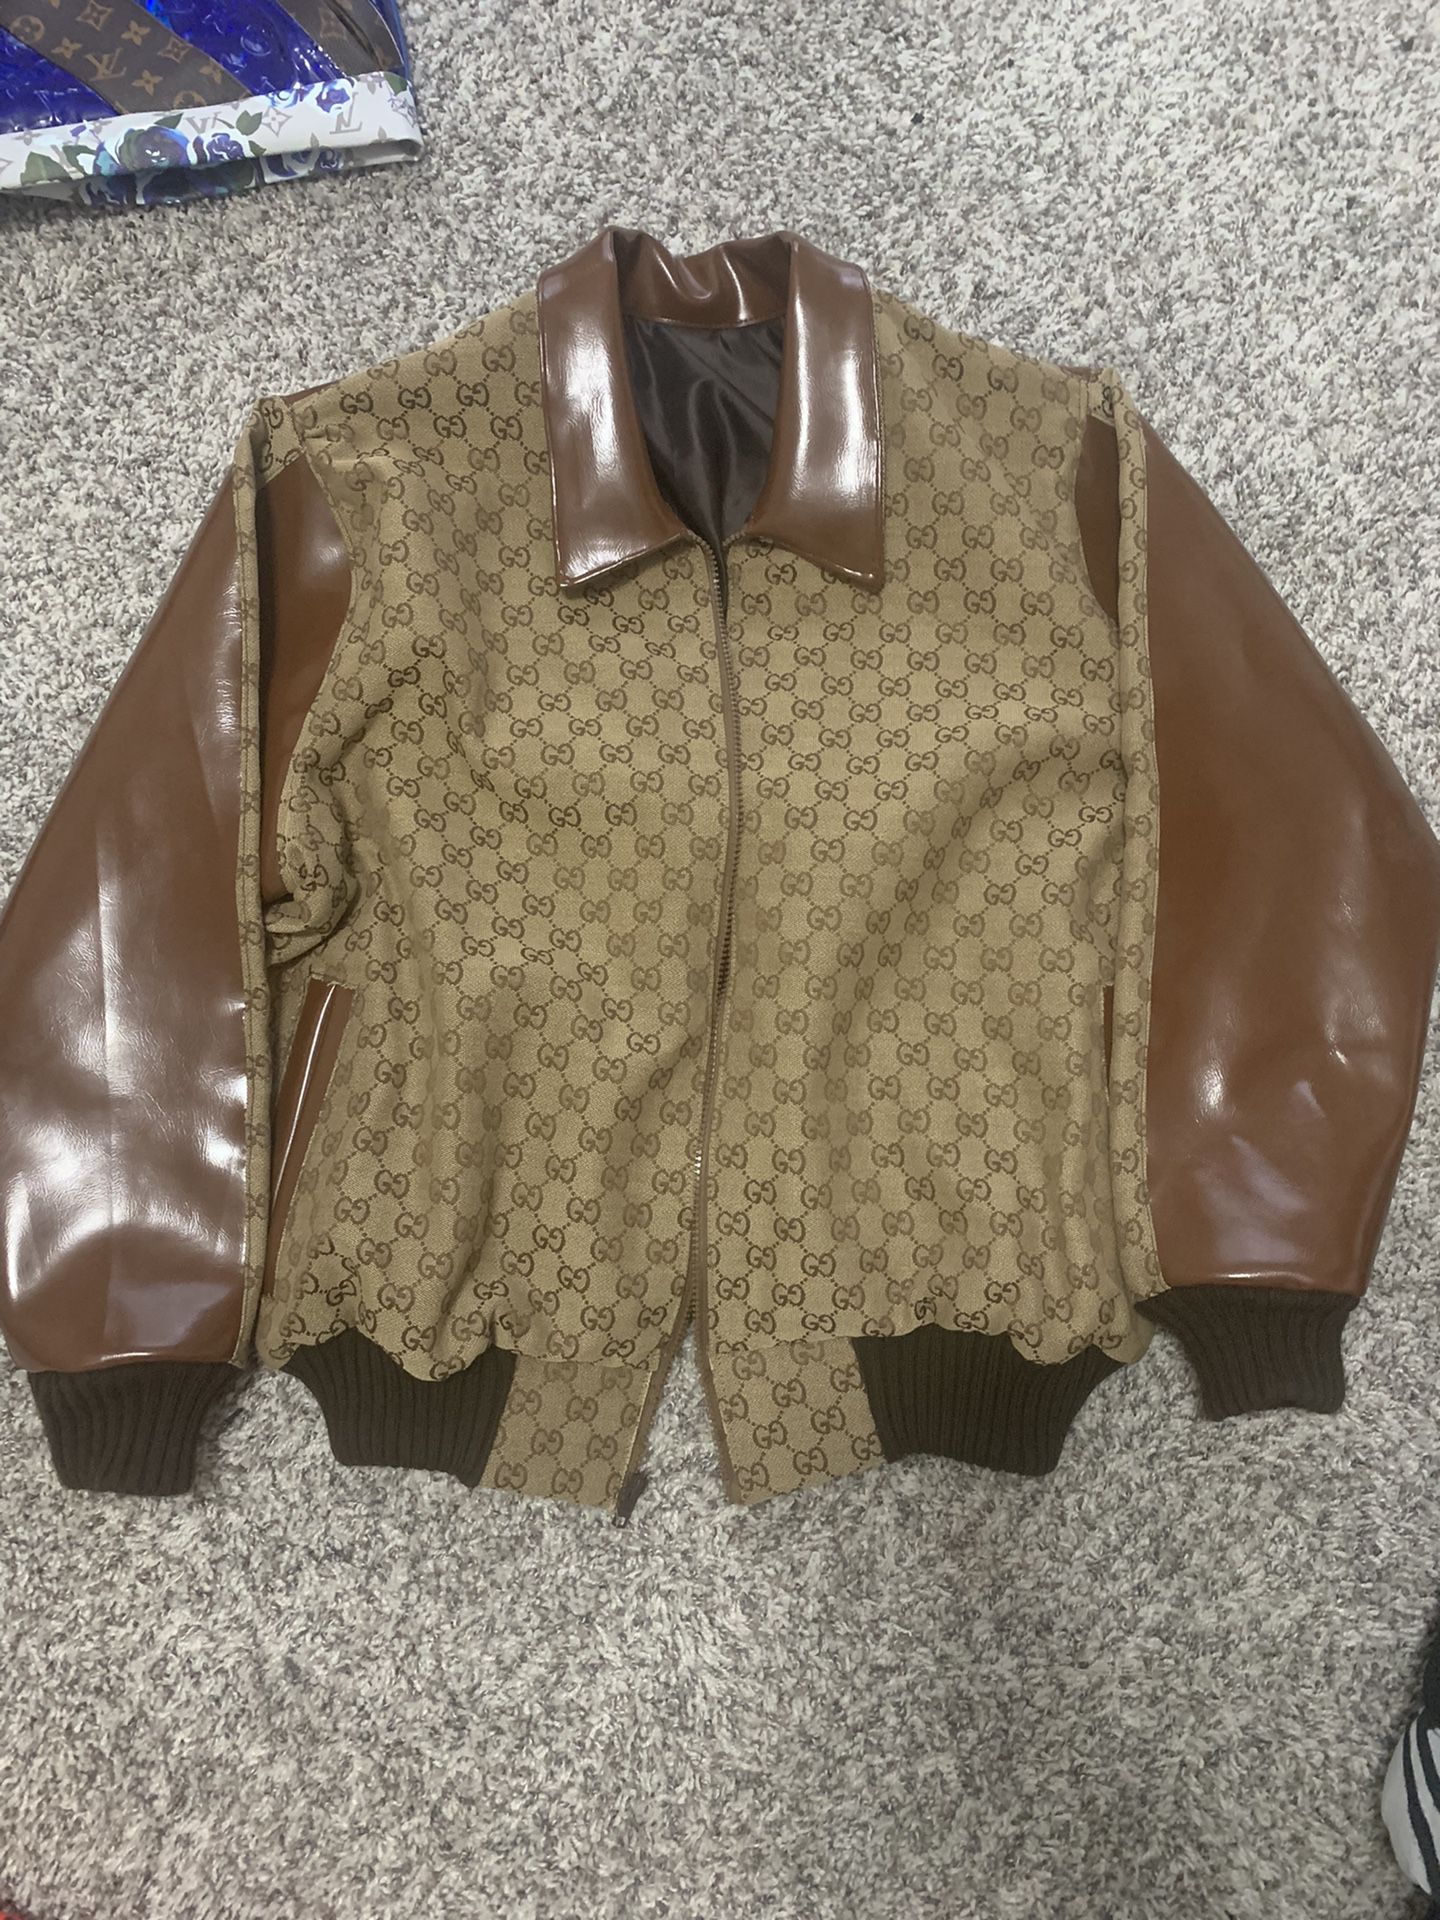 Custom Leather Trim Jacket for Sale in Stone Mountain, GA - OfferUp